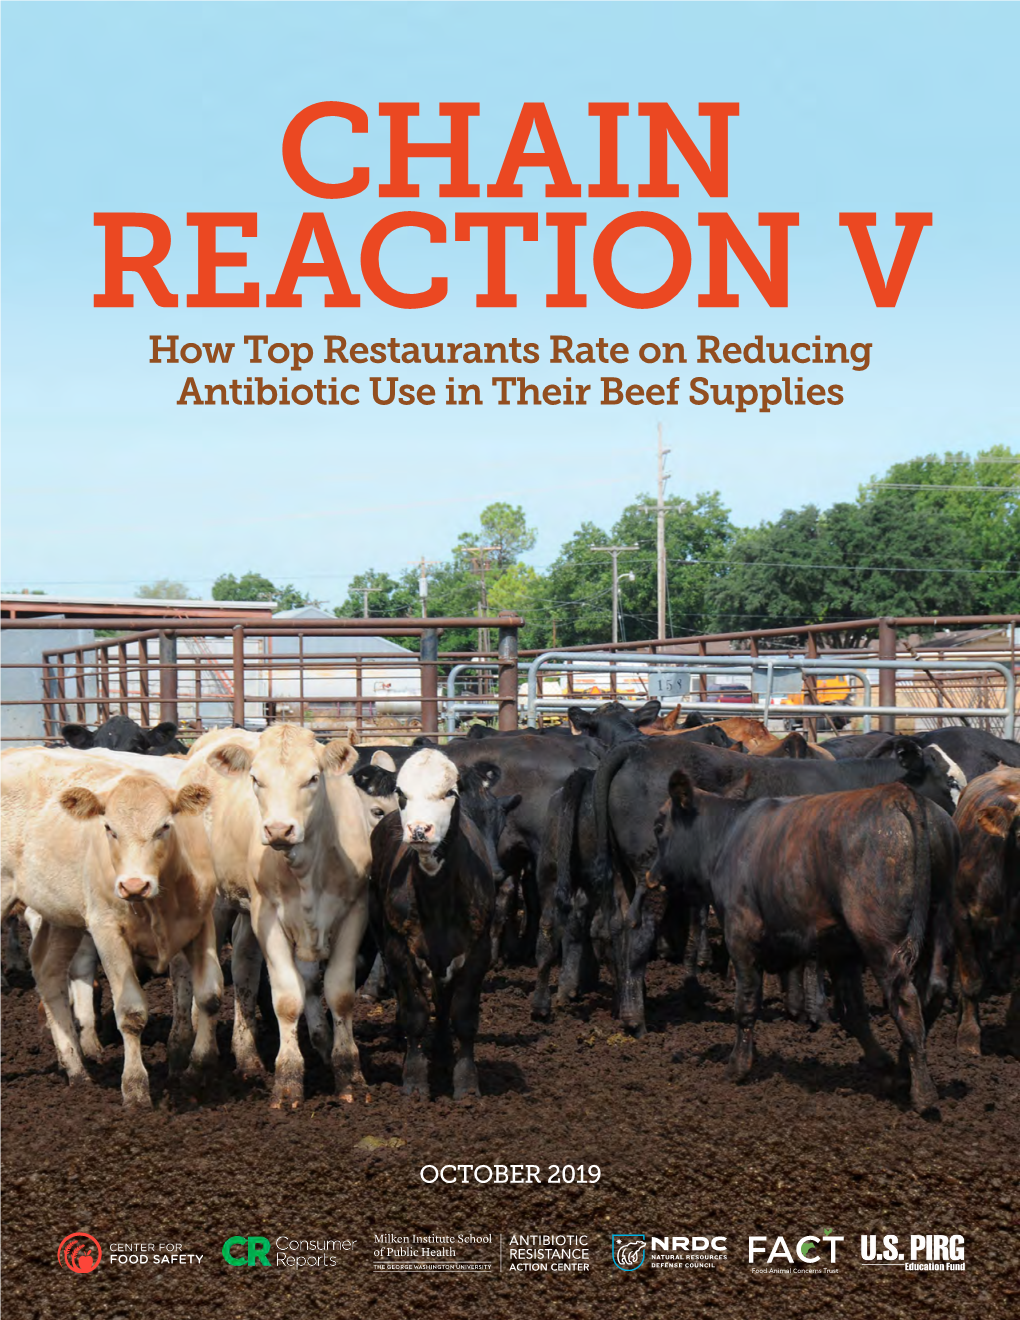 Chain Reaction V: How Top Restaurants Rate on Reducing